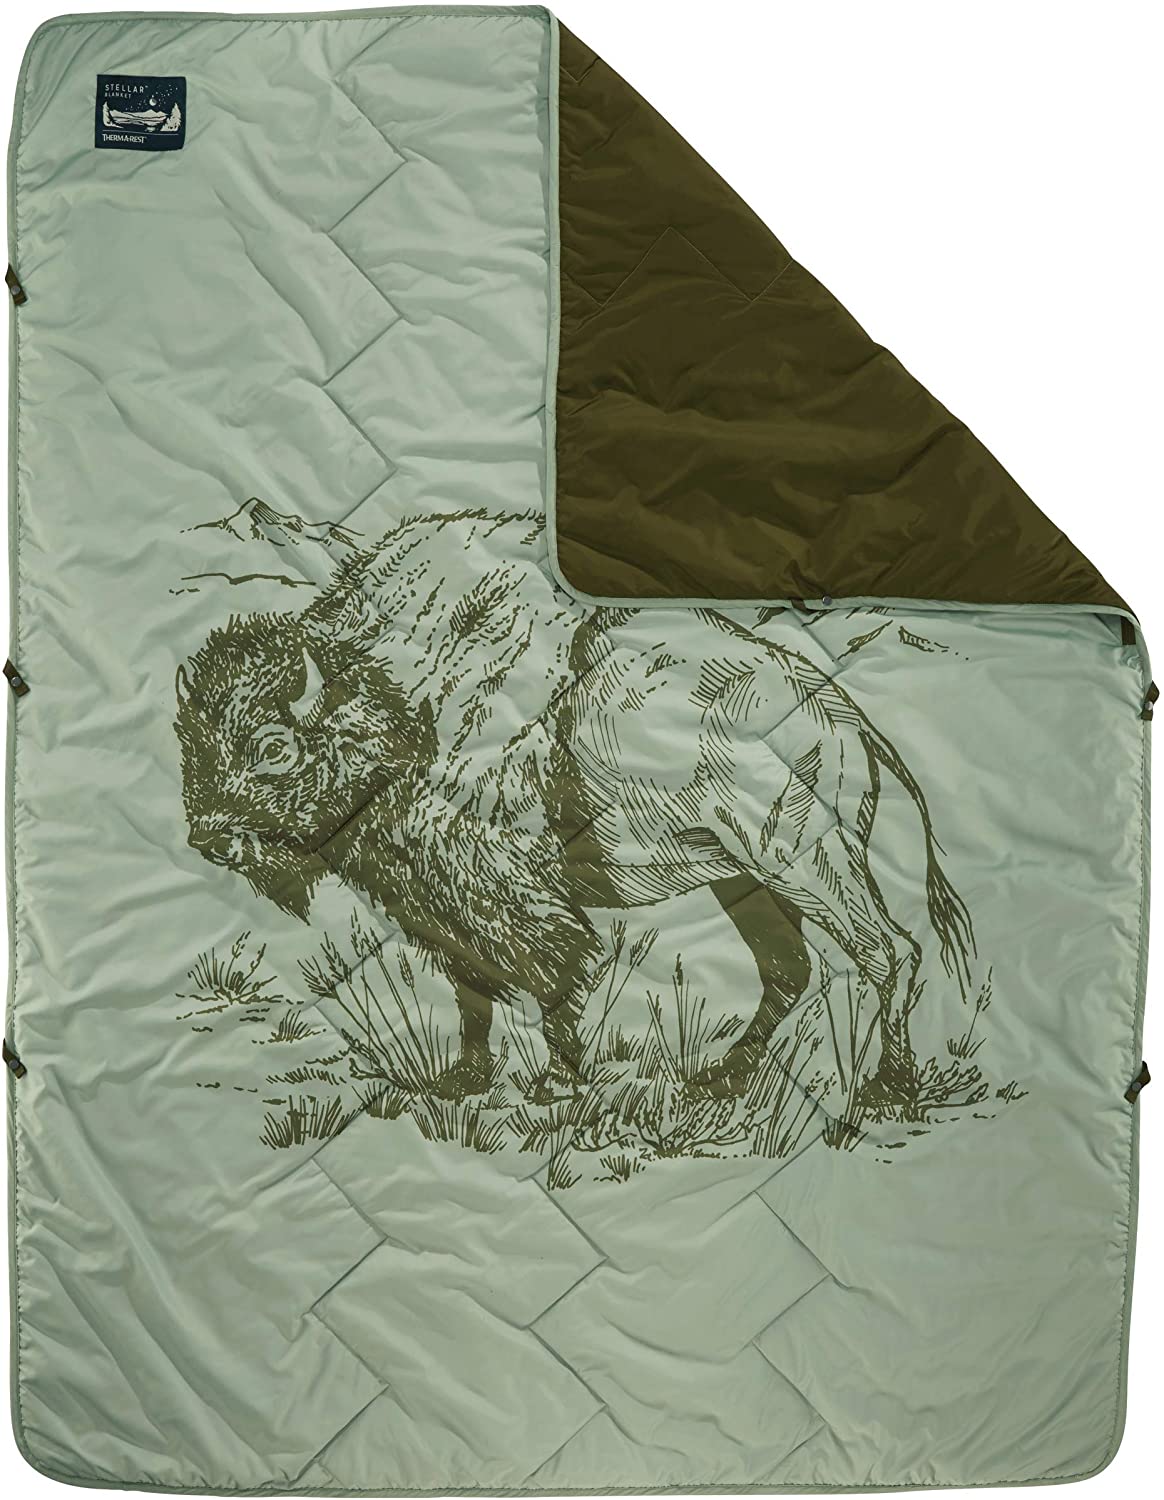 Therm-a-Rest Stellar camping blanket